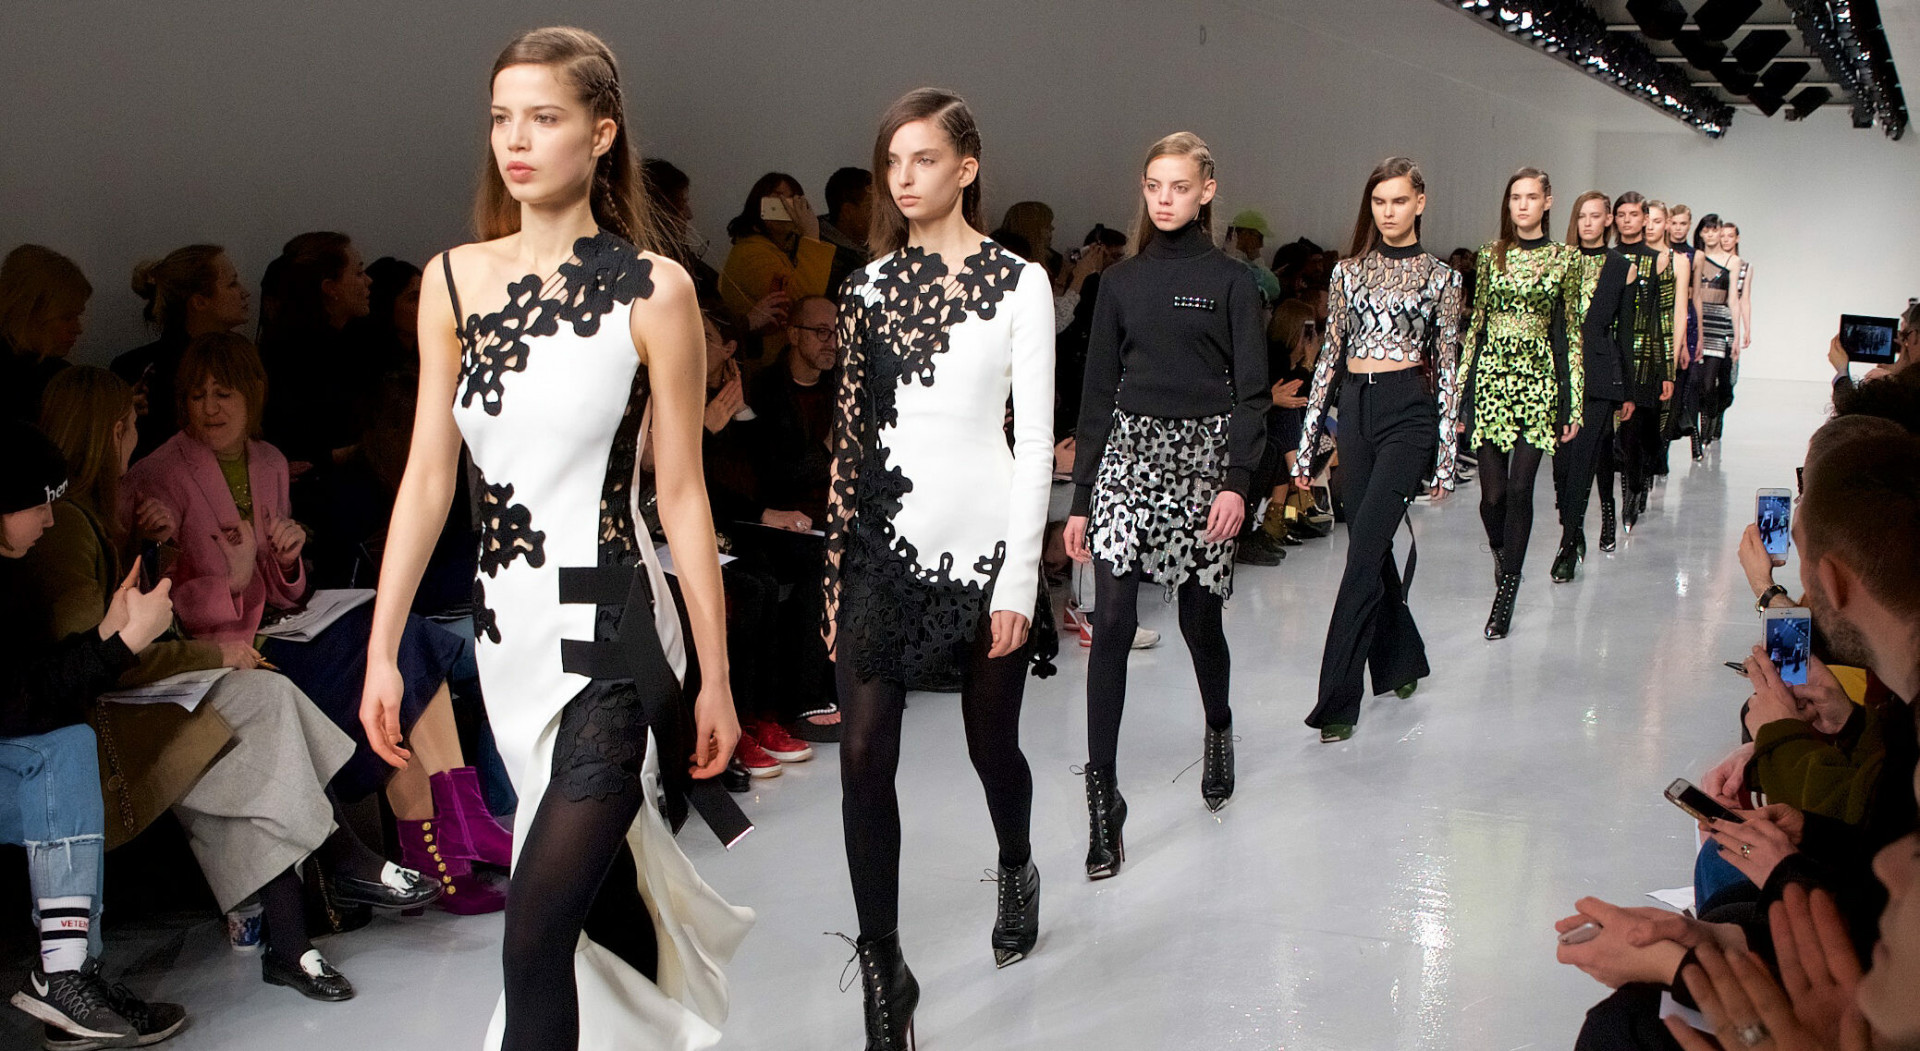 How To Get Invited To A Fashion Week Show In New York, London